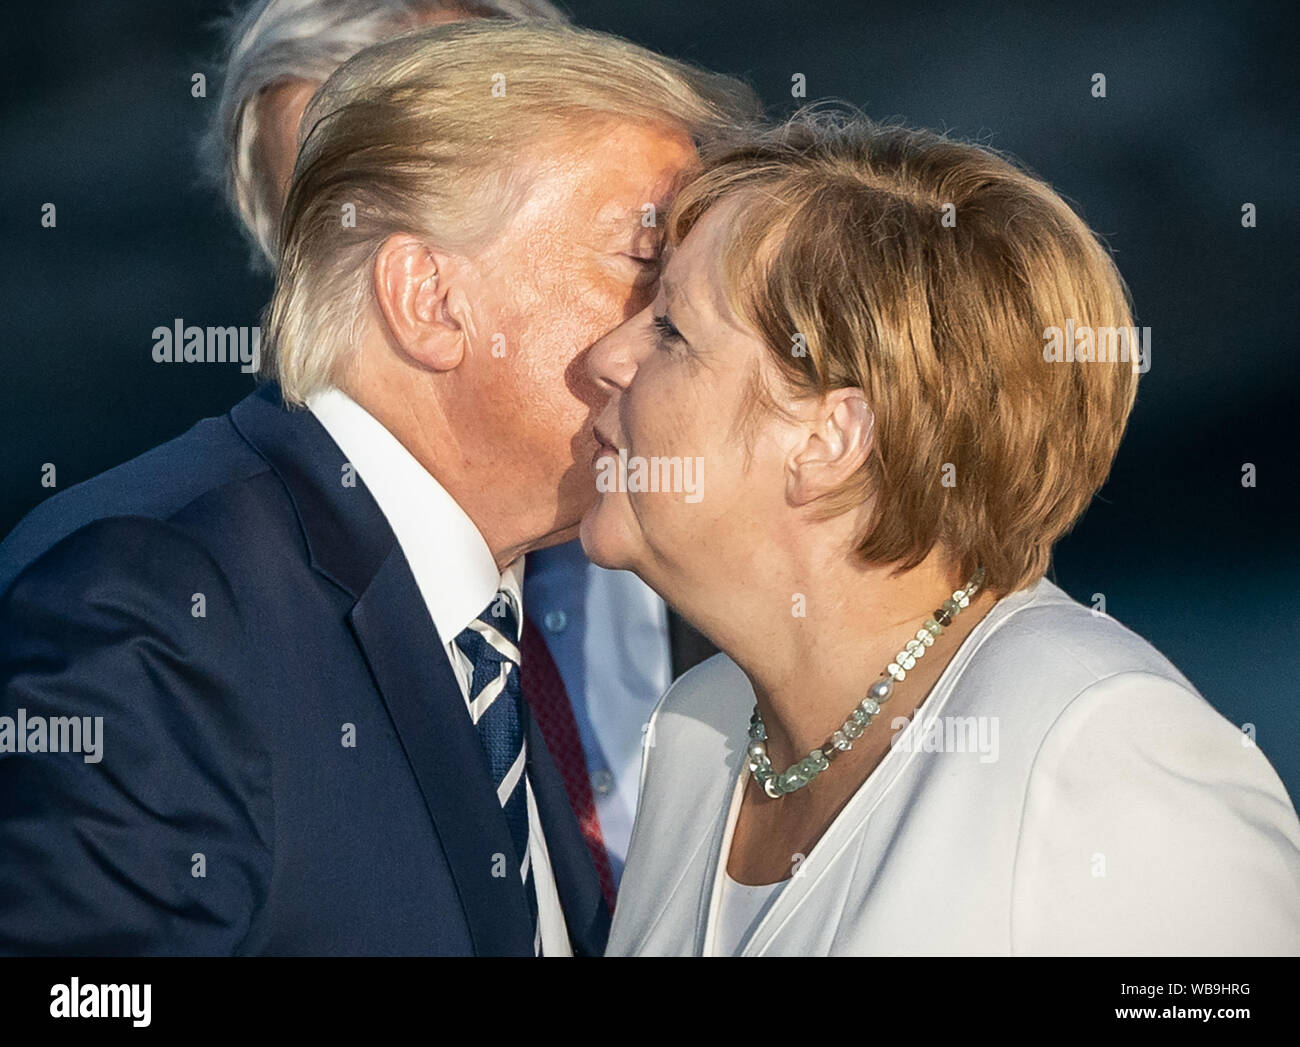 Biarritz, France. 25th Aug 2019. Donald Trump, President of the USA, kisses  German Chancellor Angela Merkel (CDU) to greet her at a joint family photo  at the G7 summit. The G7 summit